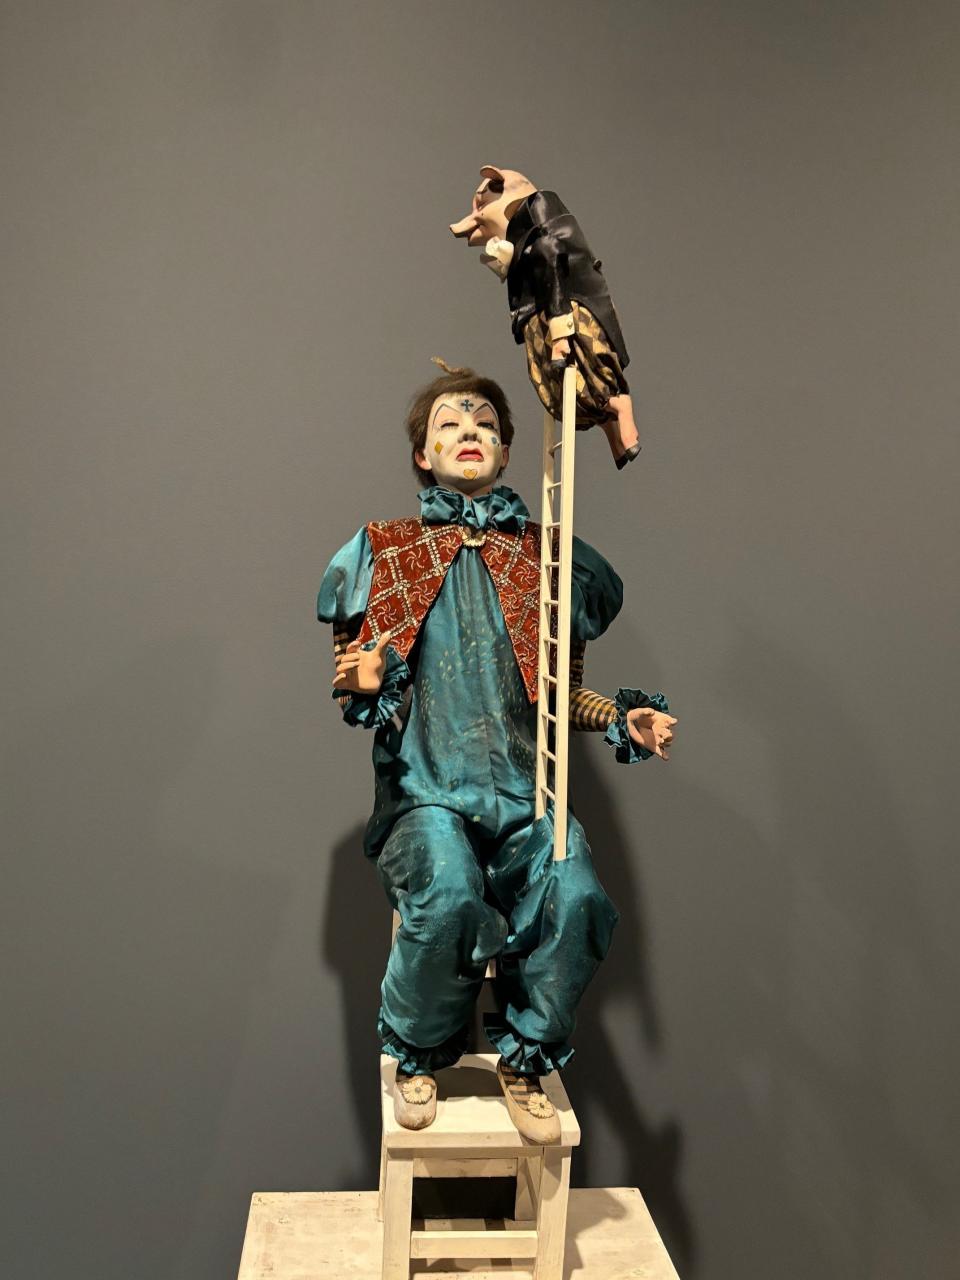 A papier-mâché and mixed media musical automaton of a clown and an acrobatic pig greets visitors to the "Jamie Wyeth: Unsettled" exhibition at the Brandywine Museum of Art. The 19th-century musical mechanism made in France is owned by Wyeth and plays four tinkling bell songs.